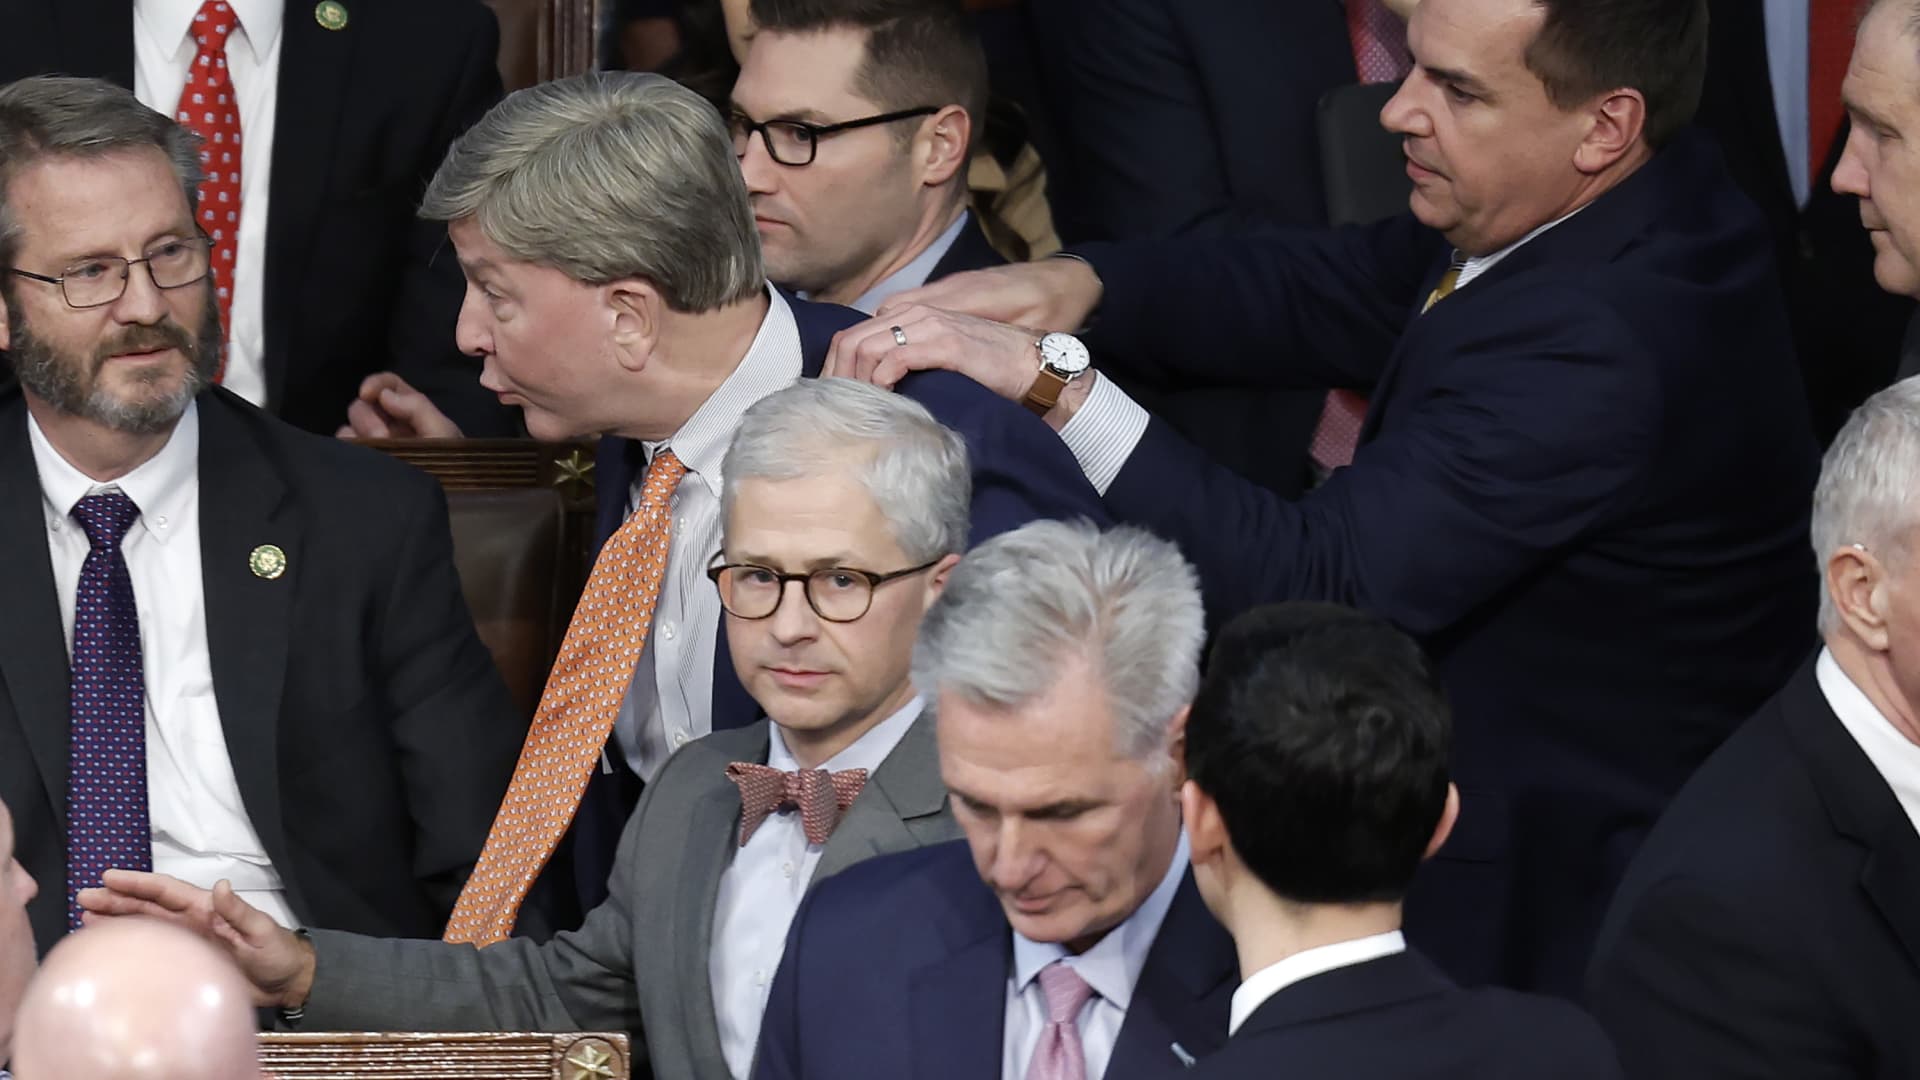 WASHINGTON, DC - JANUARY 06: U.S. Rep.-elect Mike Rogers (R-AL) (C) is restrained by Rep.-elect Richard Hudson (R-NC) after getting into an argument with Rep.-elect Matt Gaetz (R-FL) in the House Chamber during the fourth day of elections for Speaker of the House at the U.S. Capitol Building on January 06, 2023 in Washington, DC.